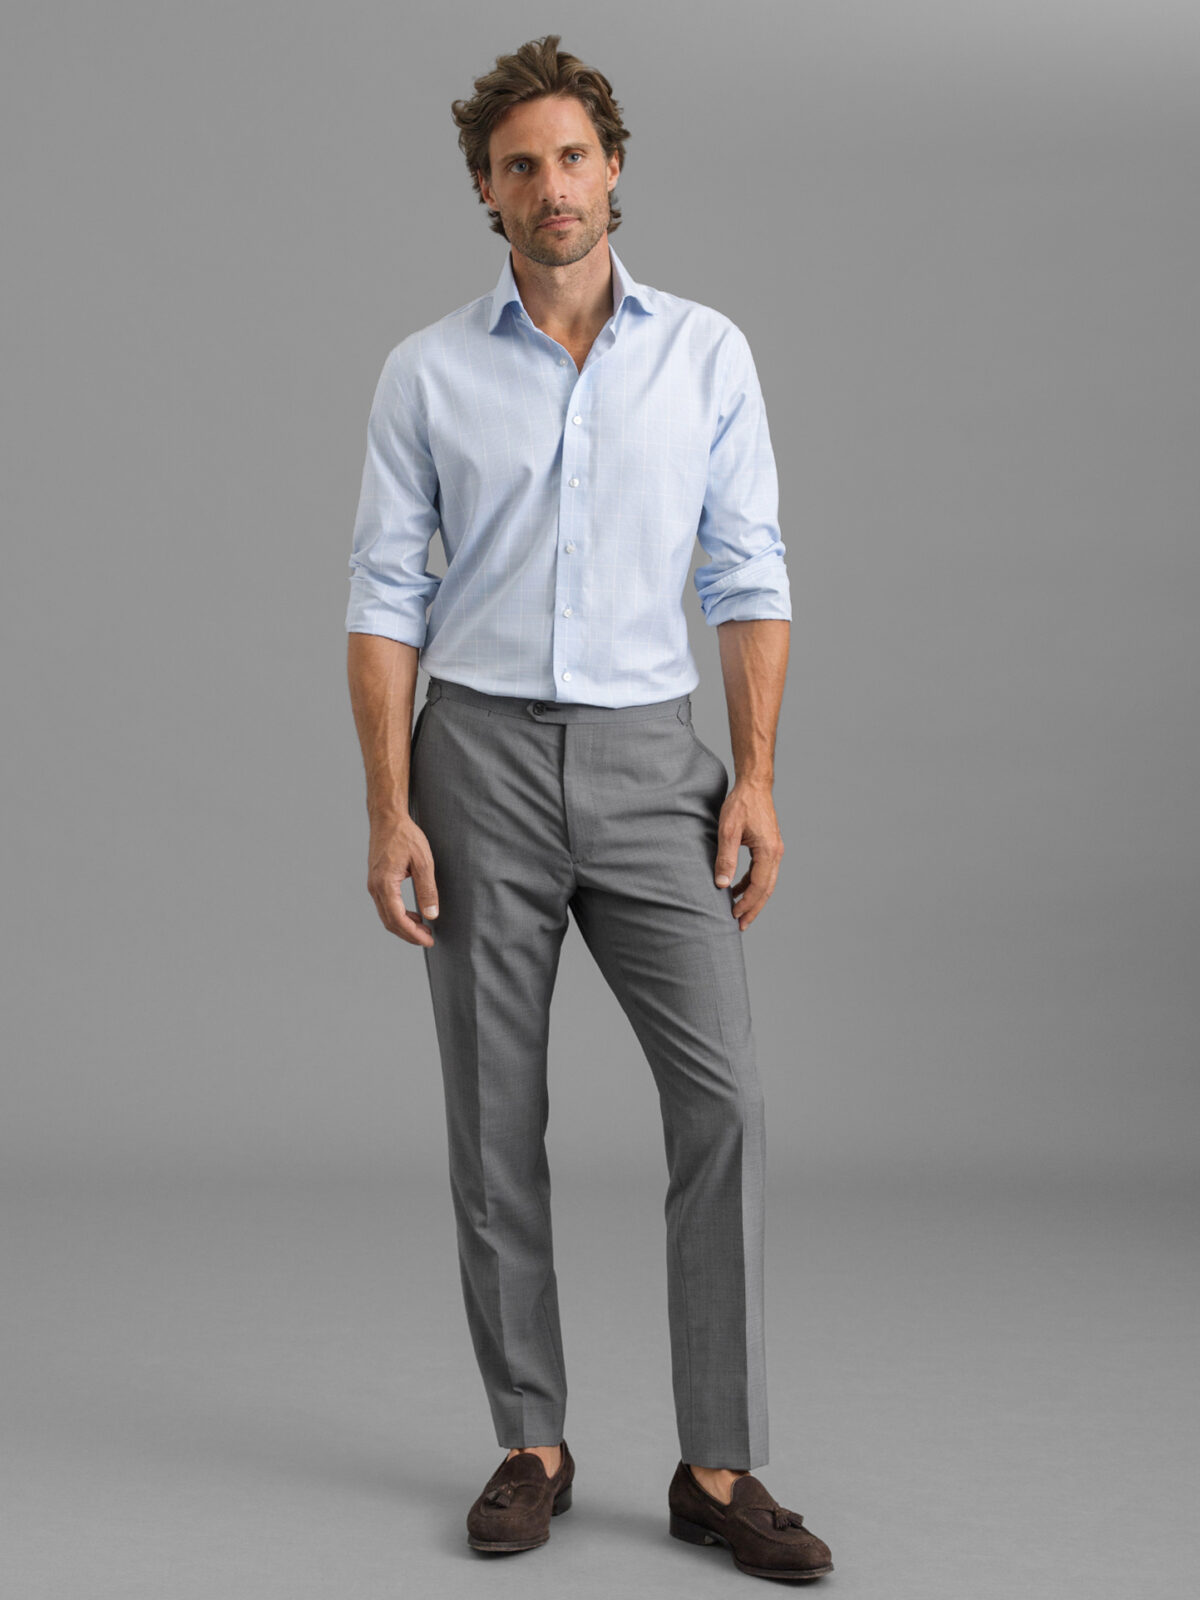 16+ Fantastic What Color Shirt Goes With Light Gray Pants Photos | Mens  fashion suits, Mens outfits, Formal men outfit